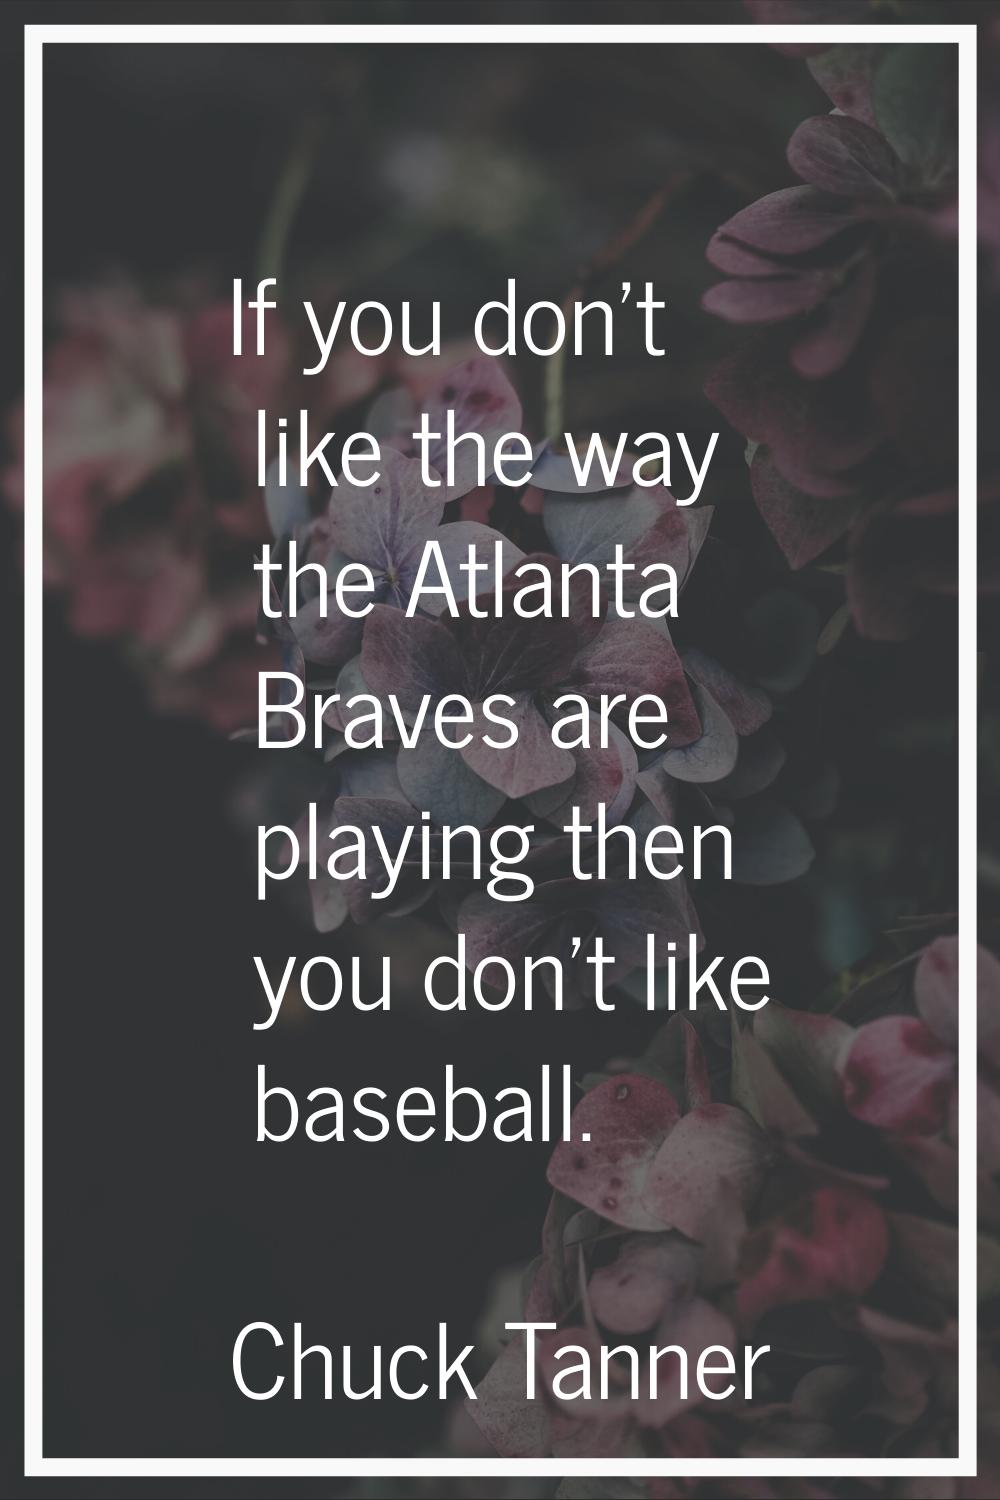 If you don't like the way the Atlanta Braves are playing then you don't like baseball.